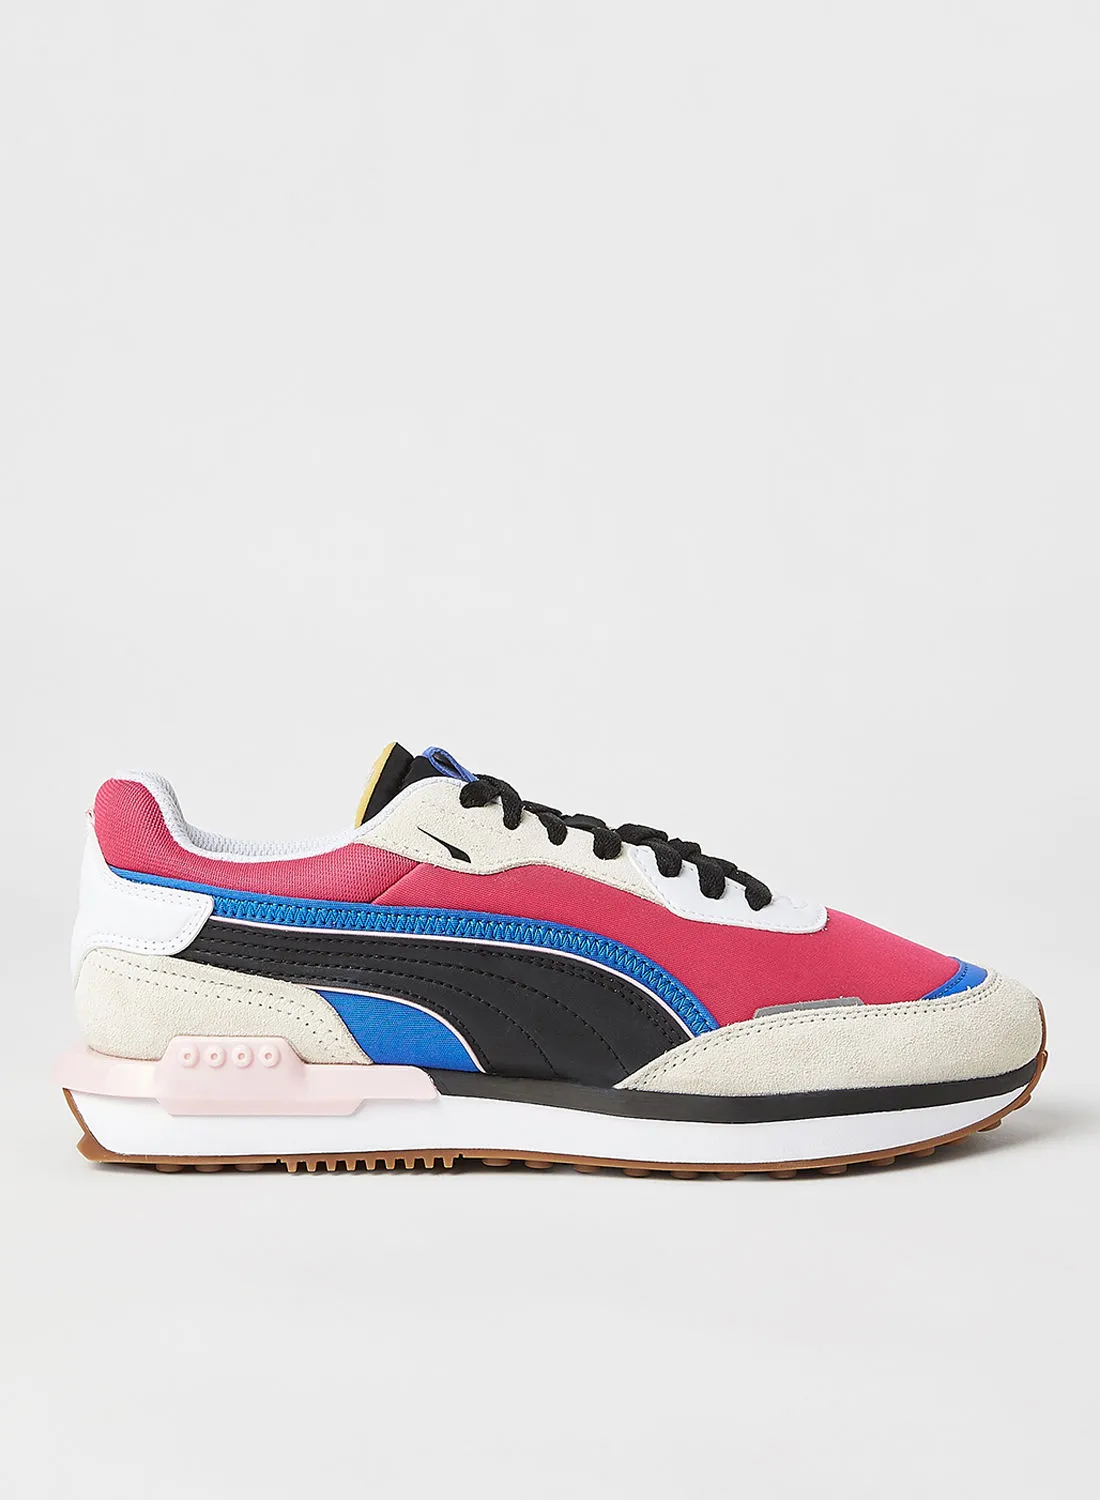 PUMA City Rider Sneakers Pink